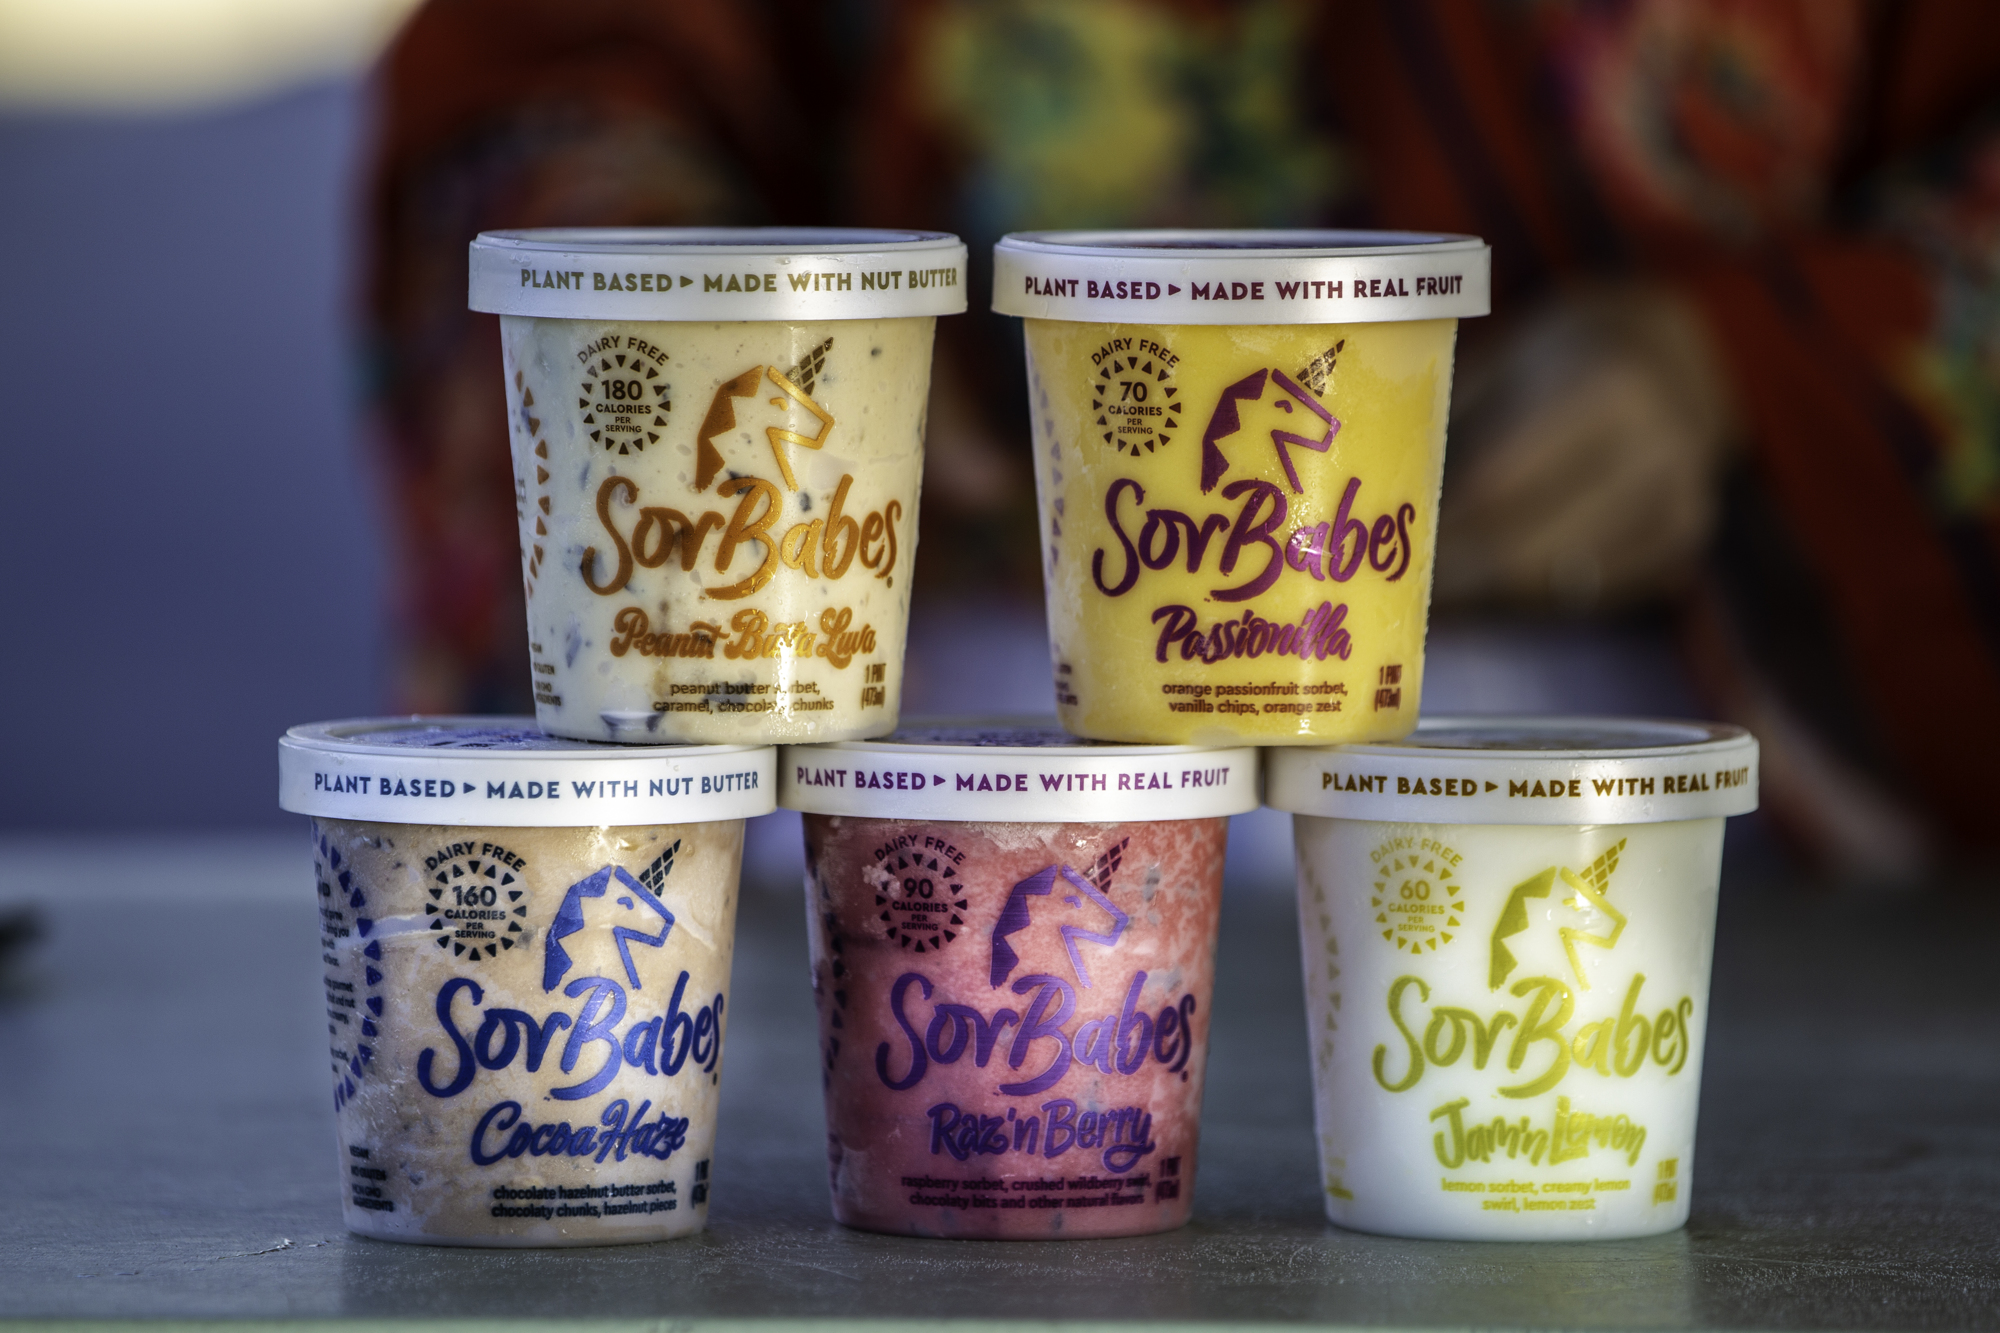 Courtesy, Koscho Photography. Deborah Gorman and Nicole Cardone, co-founders of SorBabes, want to disrupt the sorbet market with their indulgent flavors.